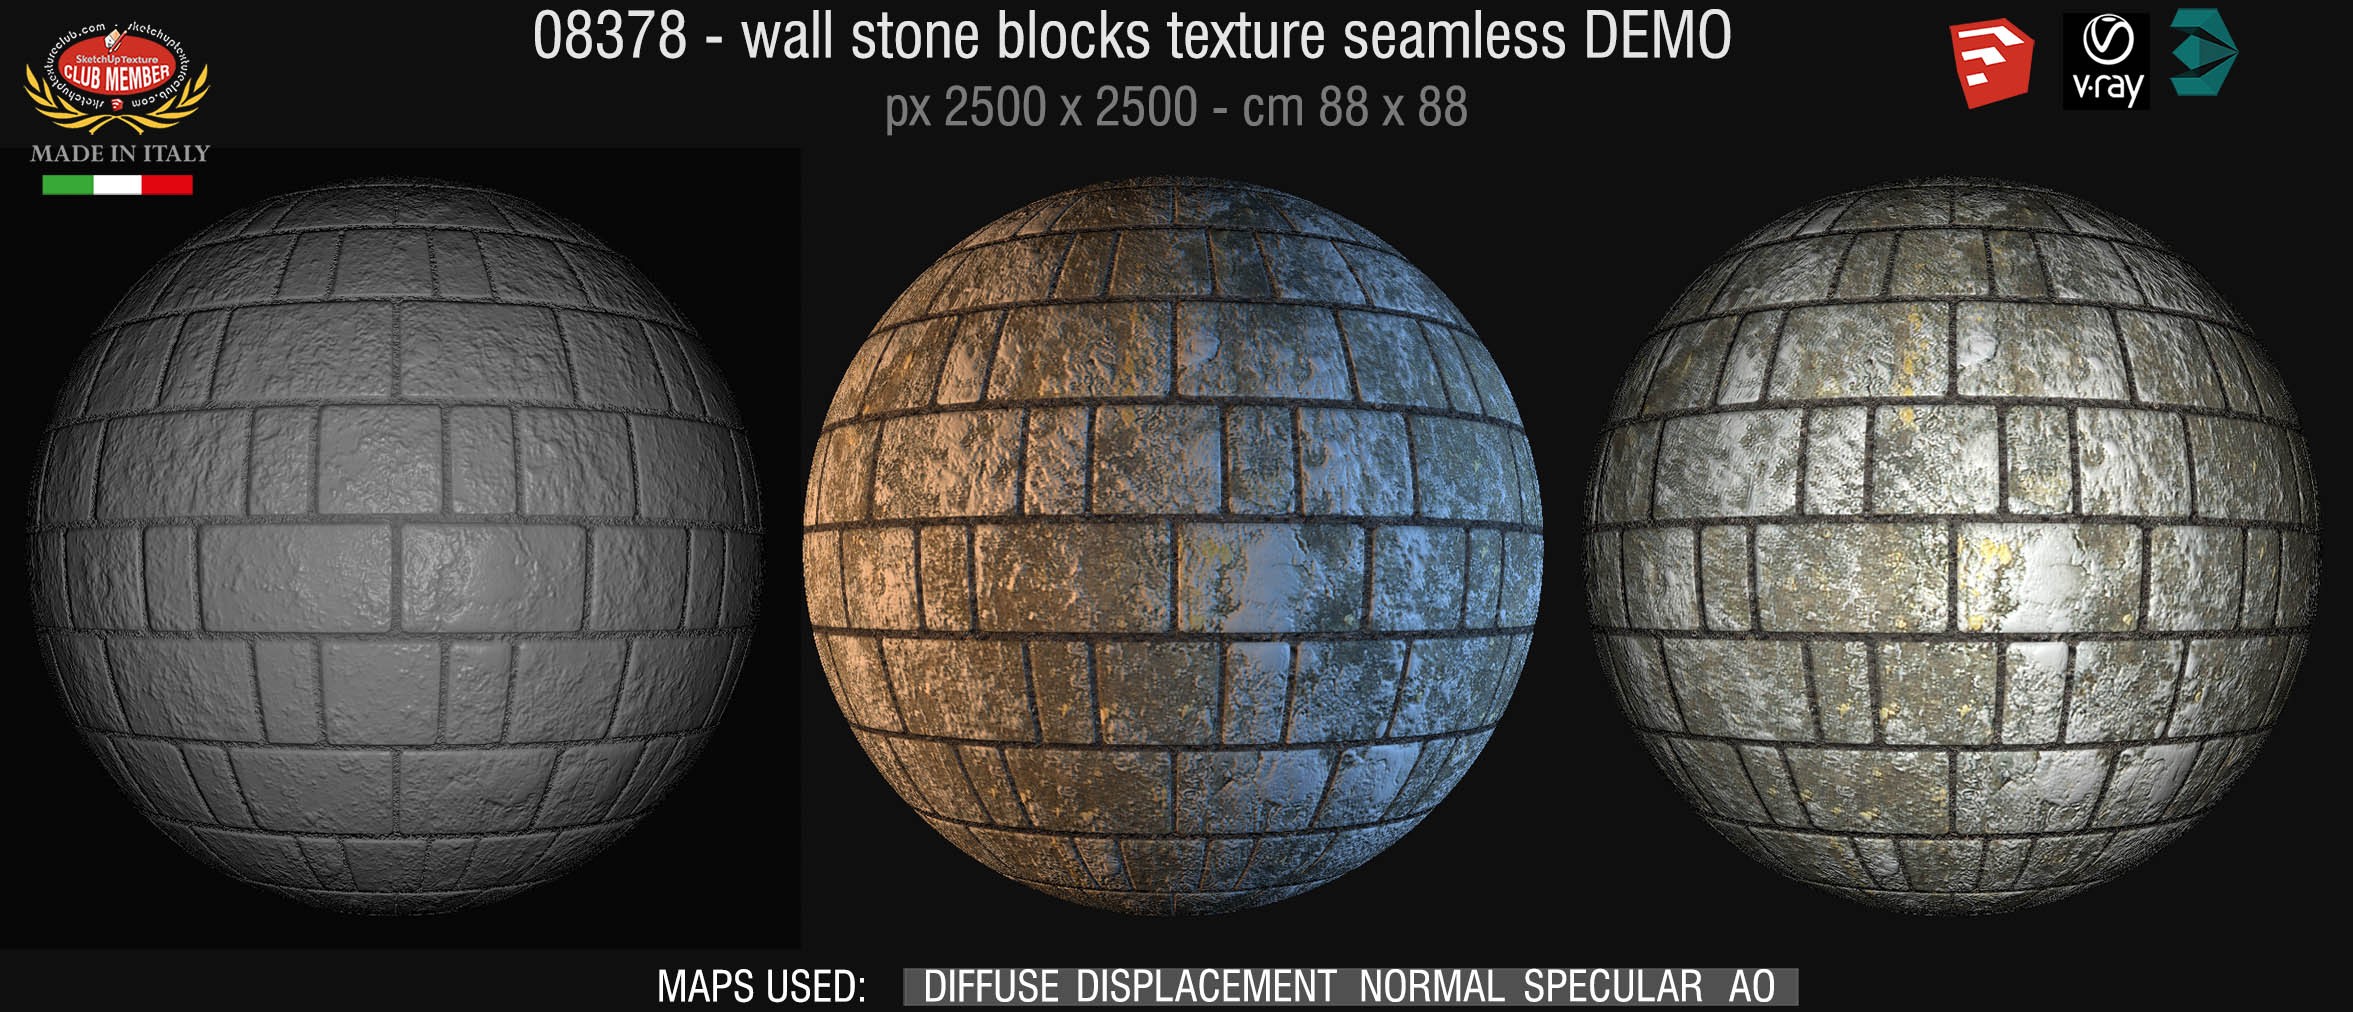 08378 HR Wall stone with regular blocks texture + maps DEMO